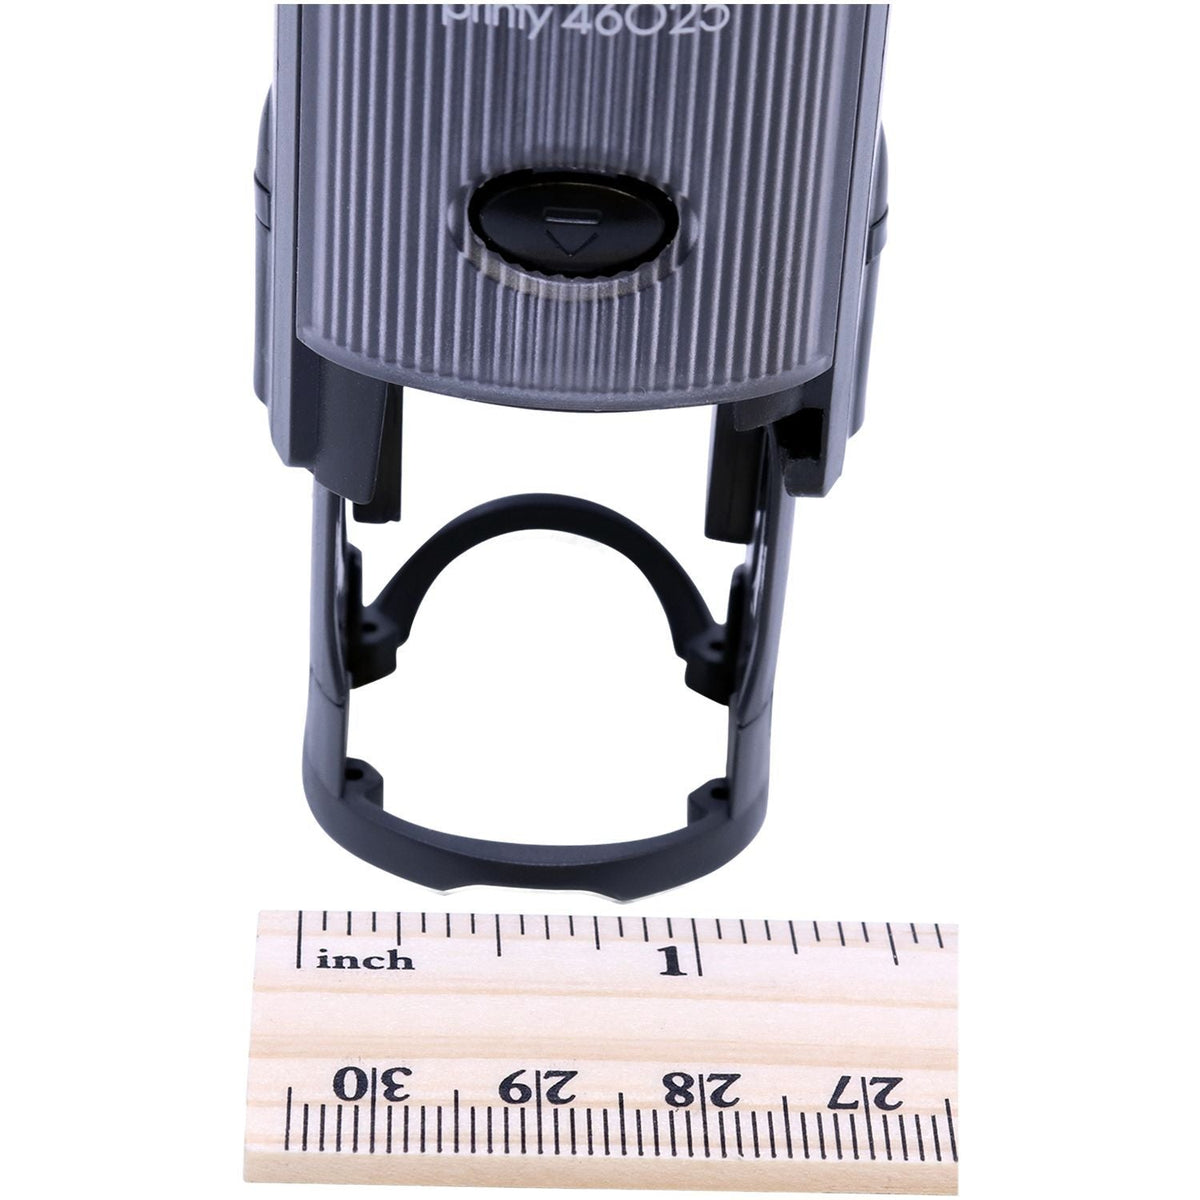 Measurment of Self-Inking Round Posted Stamp with Ruler